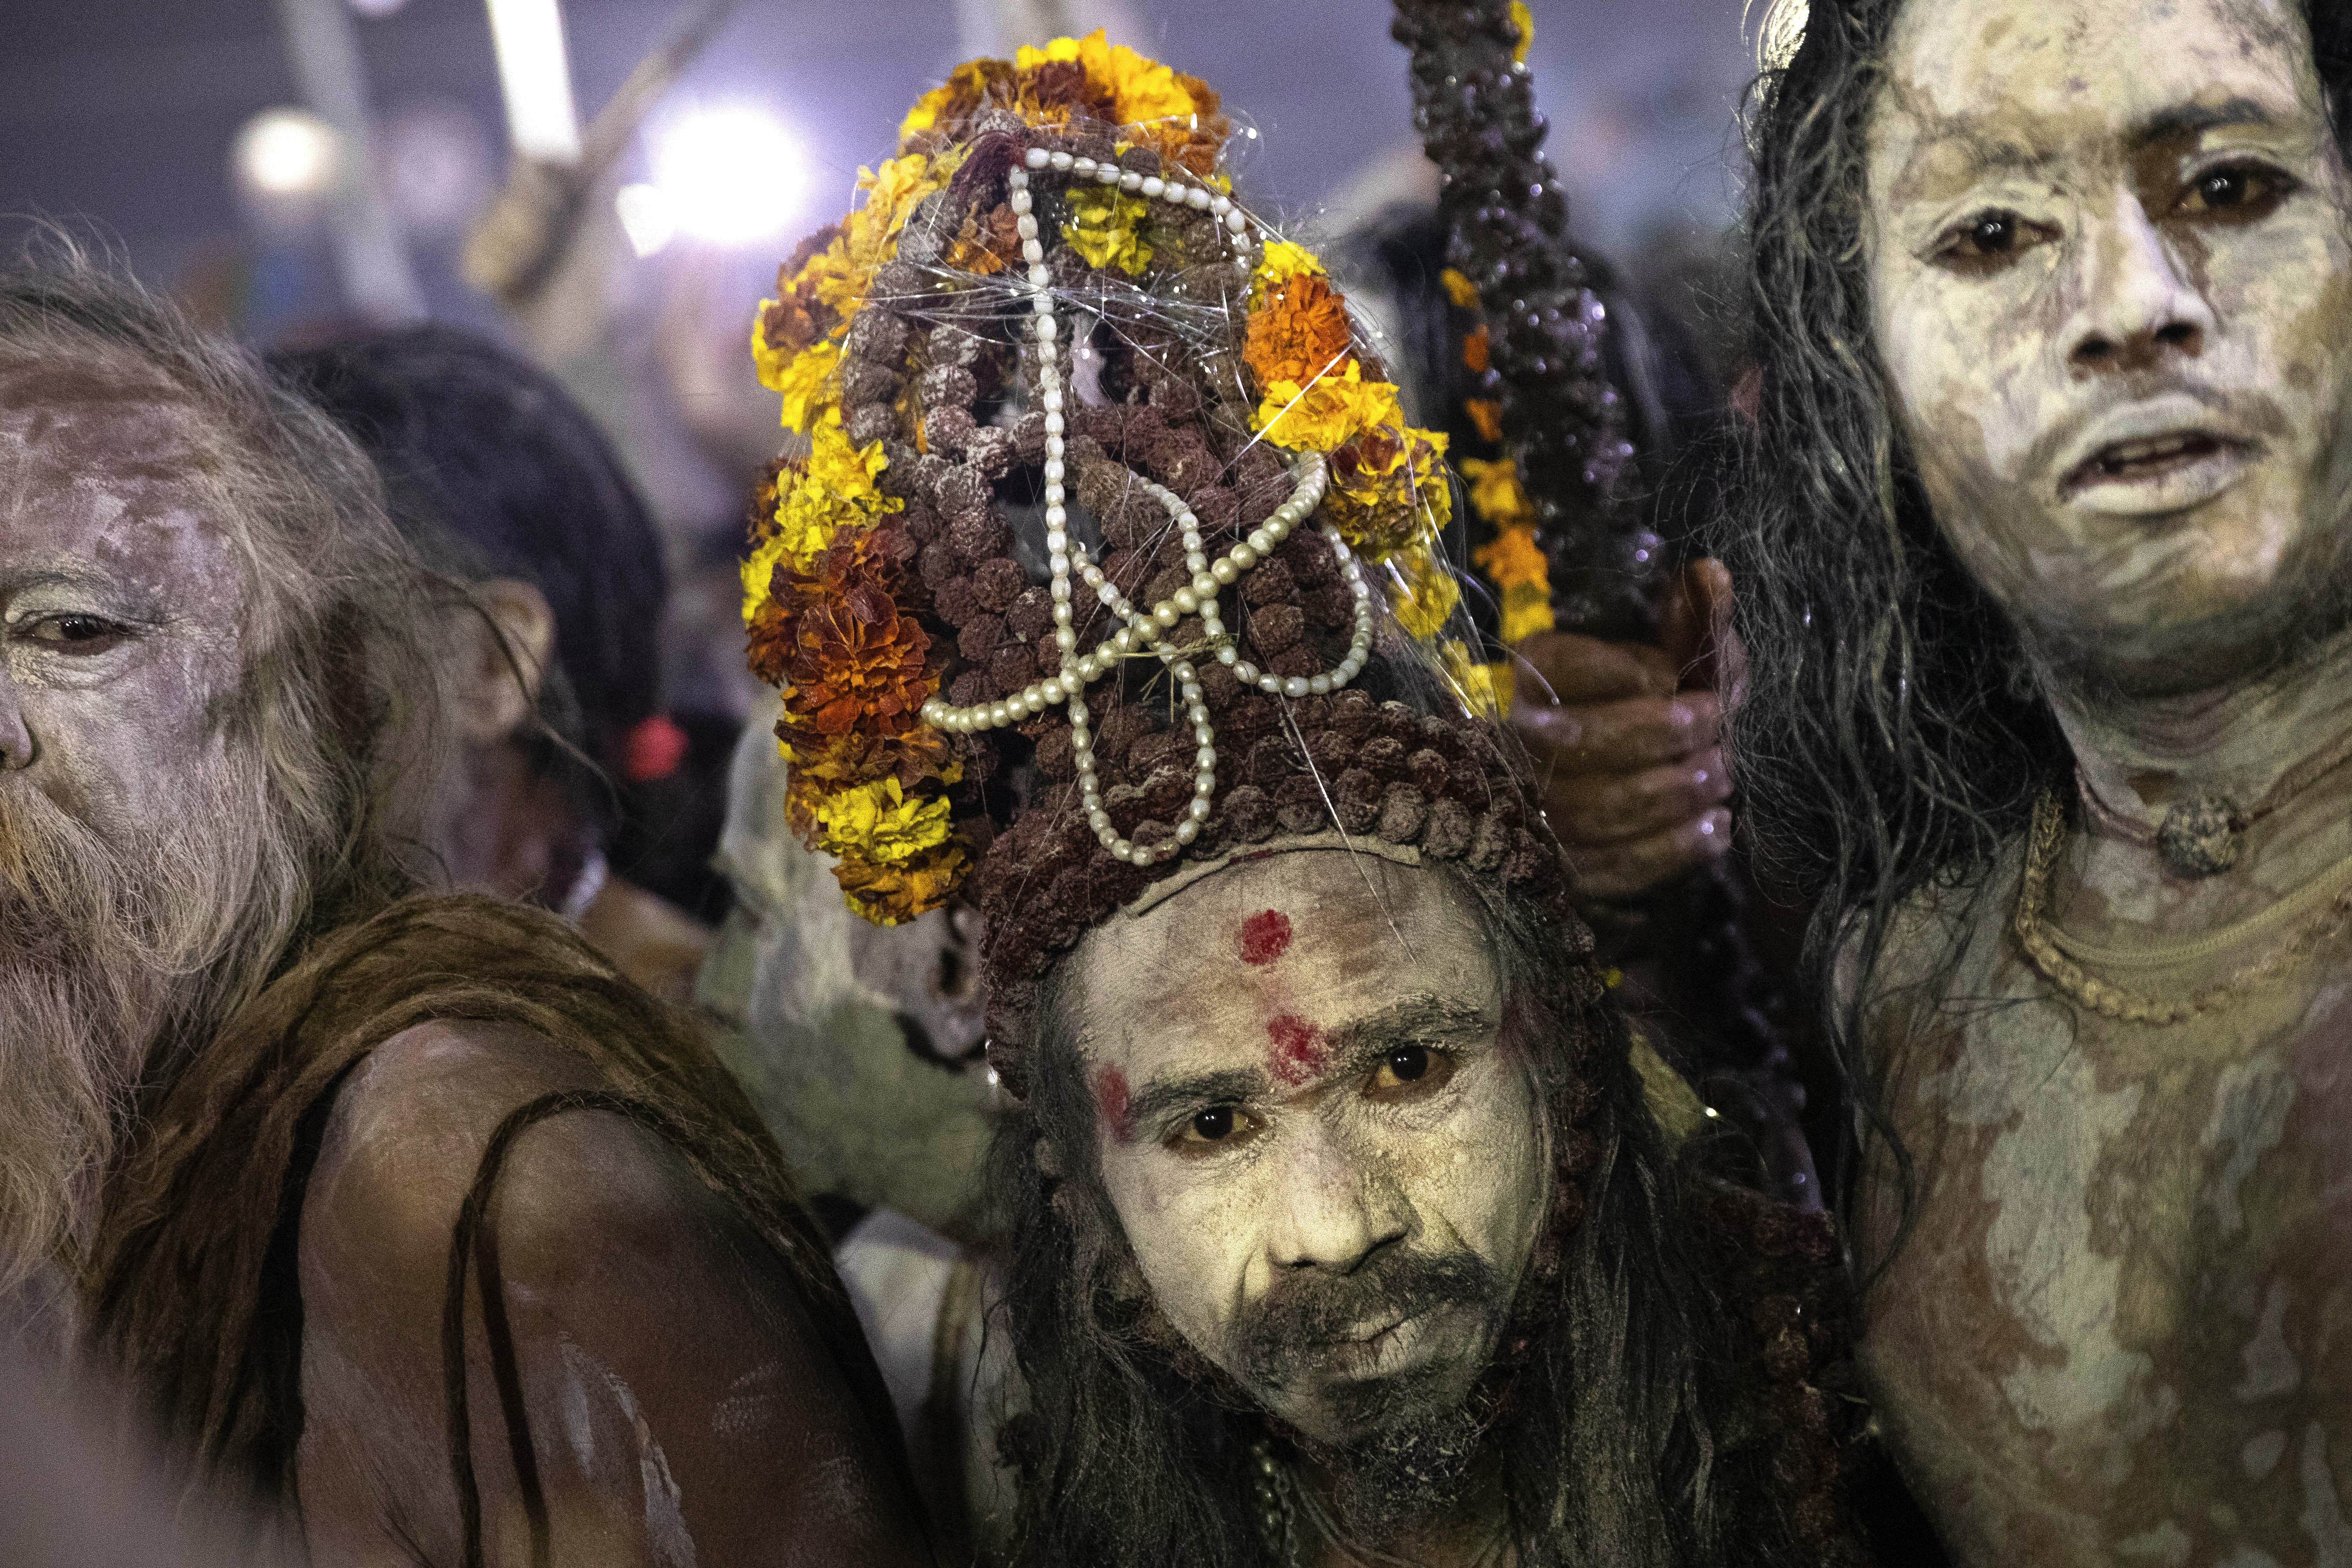 Indian Sadhus, or Hindu holy men, covered in ash walk before taking a ritualistic dip on auspicious Makar Sankranti day during the Kumbh Mela, or pitcher festival in Prayagraj, Uttar Pradesh state, India, Tuesday, Jan.15, 2019. The Kumbh Mela is a series of ritual baths by Hindu holy men, and other pilgrims at the confluence of three sacred rivers  the Yamuna, the Ganges and the mythical Saraswati  that dates back to at least medieval times. The city's Mughal-era name Allahabad was recently changed to Prayagraj. (AP Photo/Bernat Armangue)